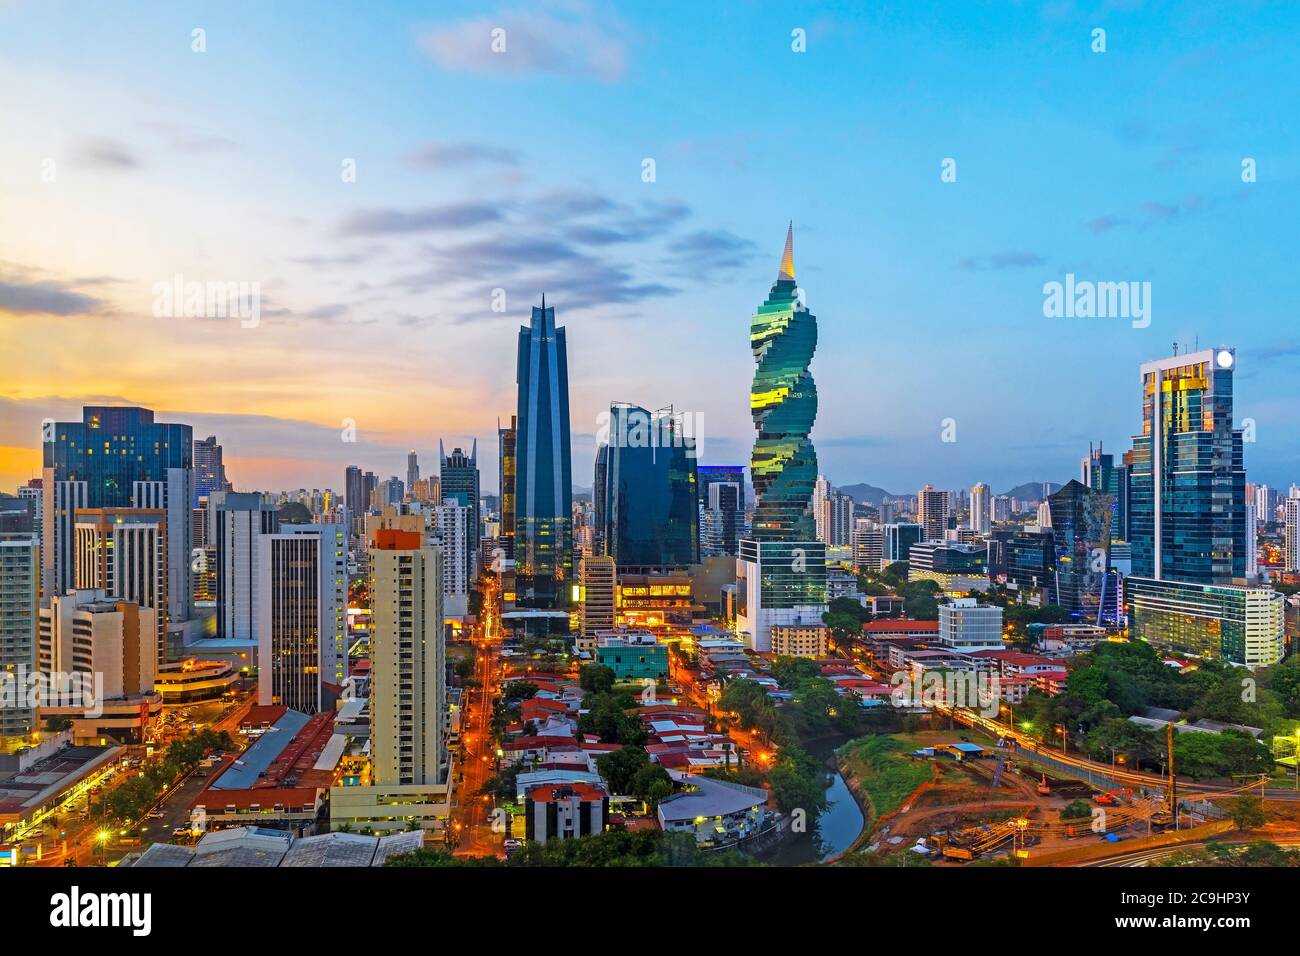 The skyline of Panama City with its skyscrapers in the financial district at sunset, Panama. Stock Photo